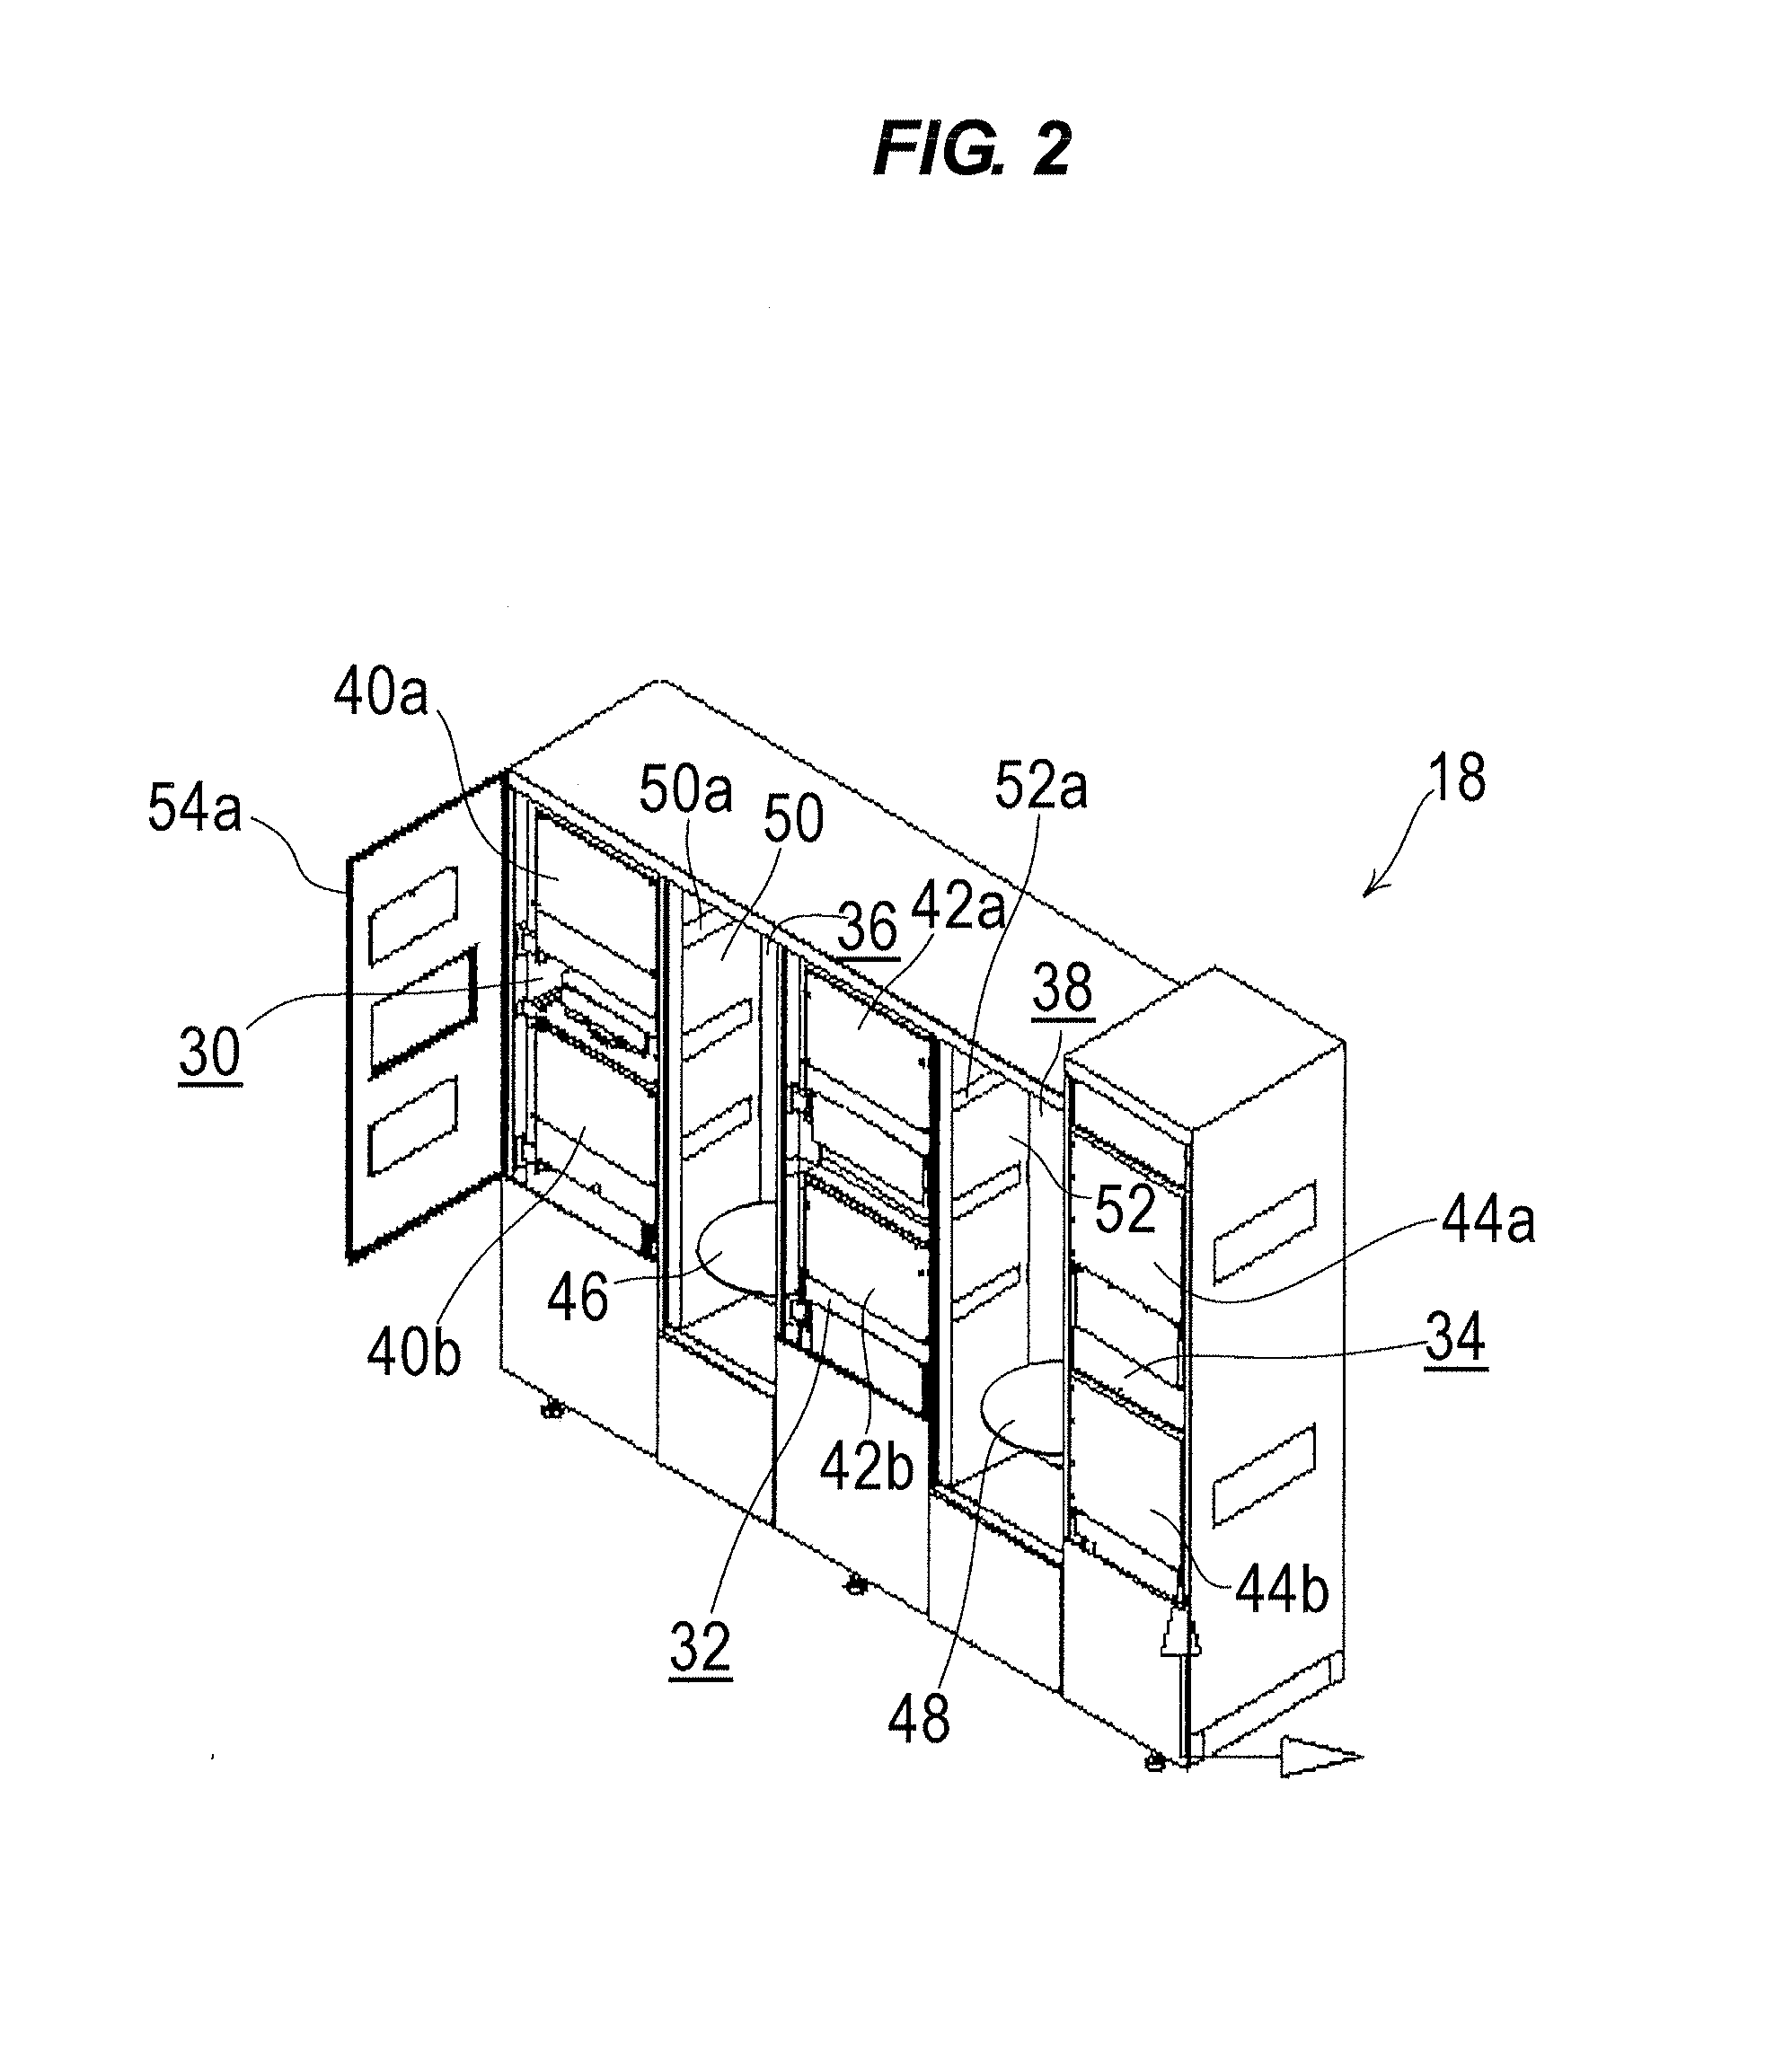 Substrate processing apparatus, substrate transfer method and substrate transfer device